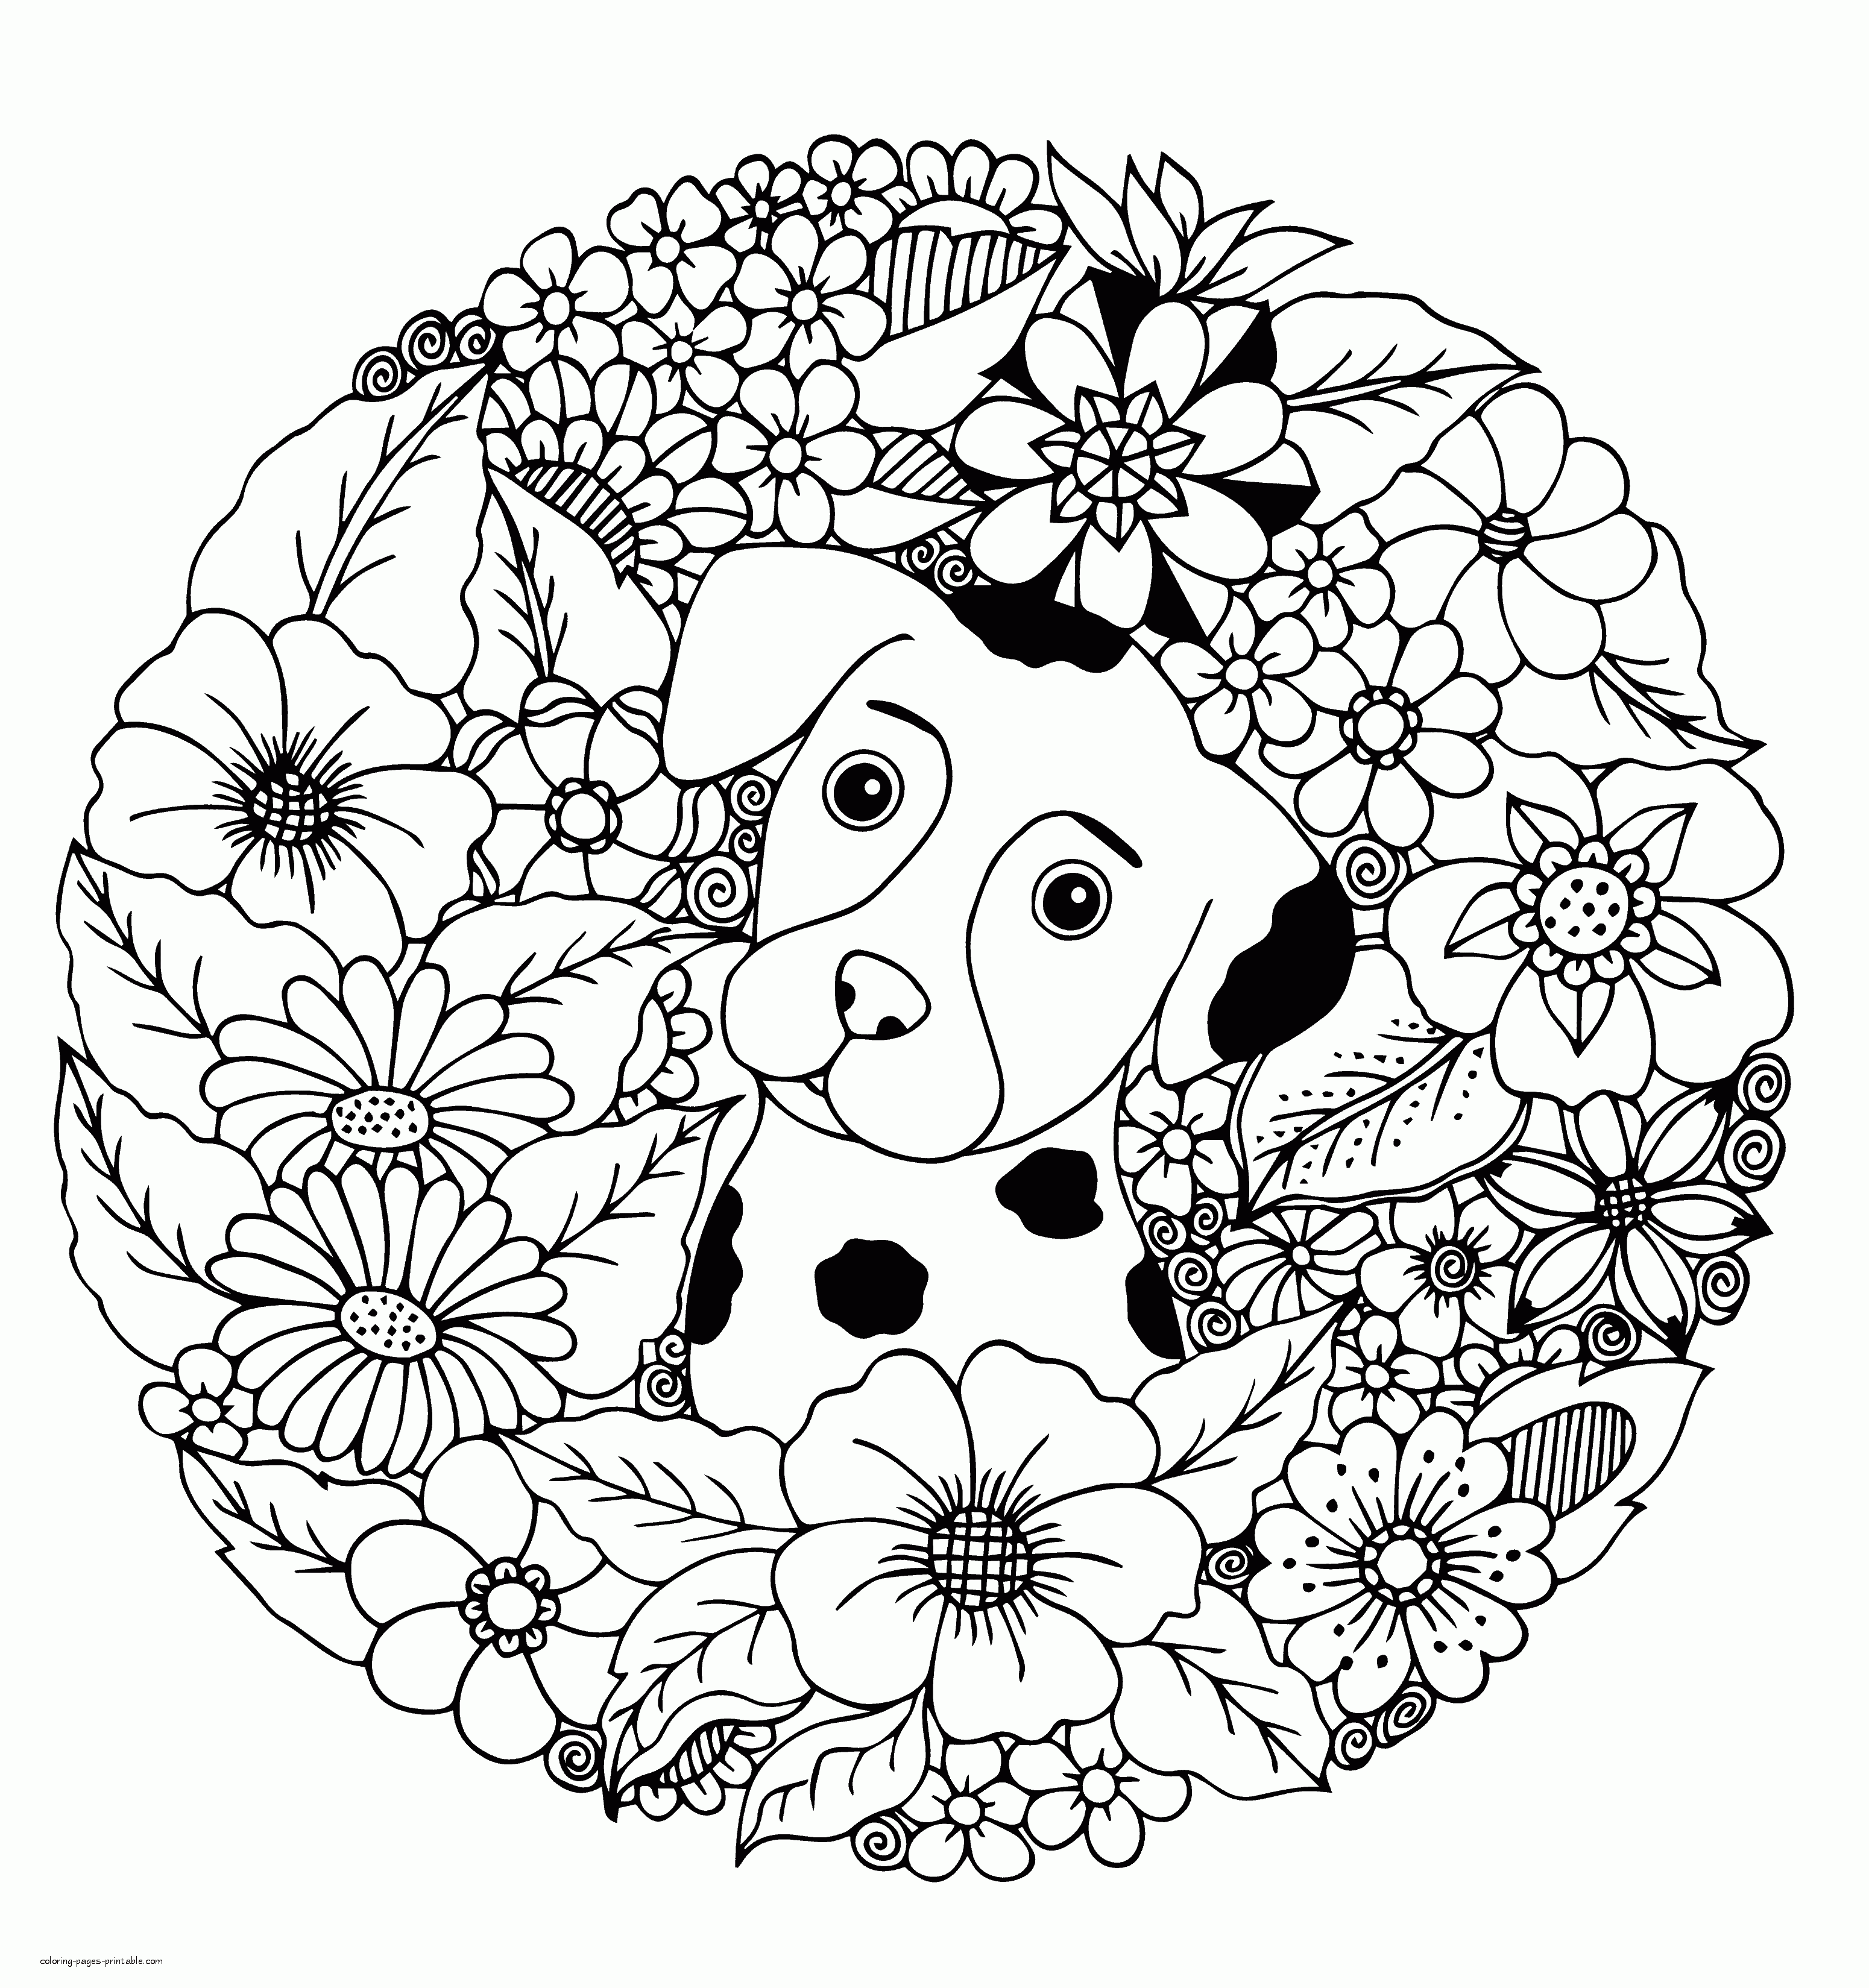 puppy-coloring-pages-for-adults-coloring-pages-printable-com